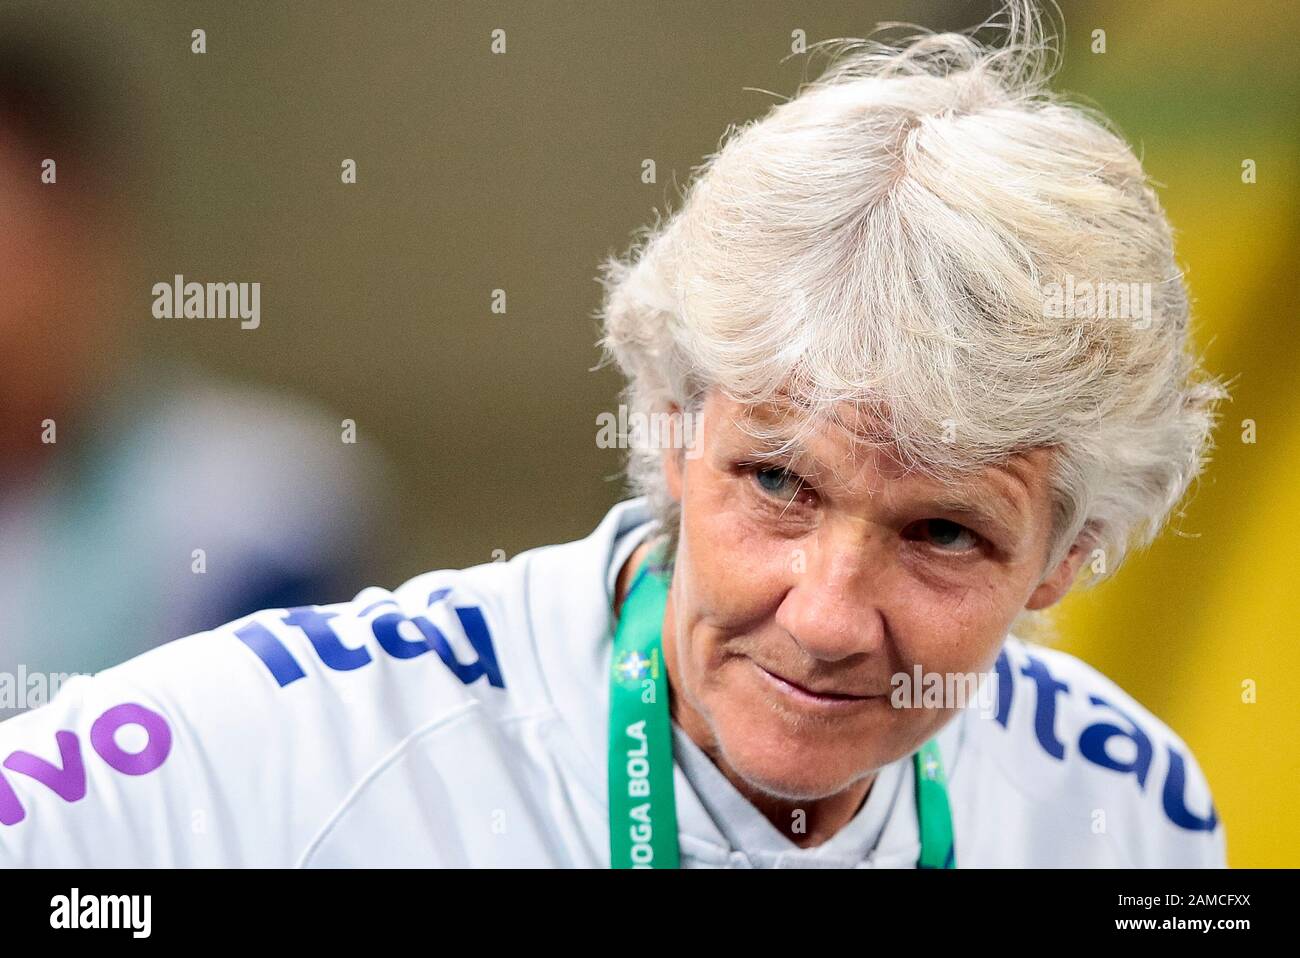 Sao Paulo Sp 12 12 2019 Football Brazil The Swedish Pia Sundhage Coach Of The Brazilian National Team During A Friendly Match Between Mexico Stock Photo Alamy